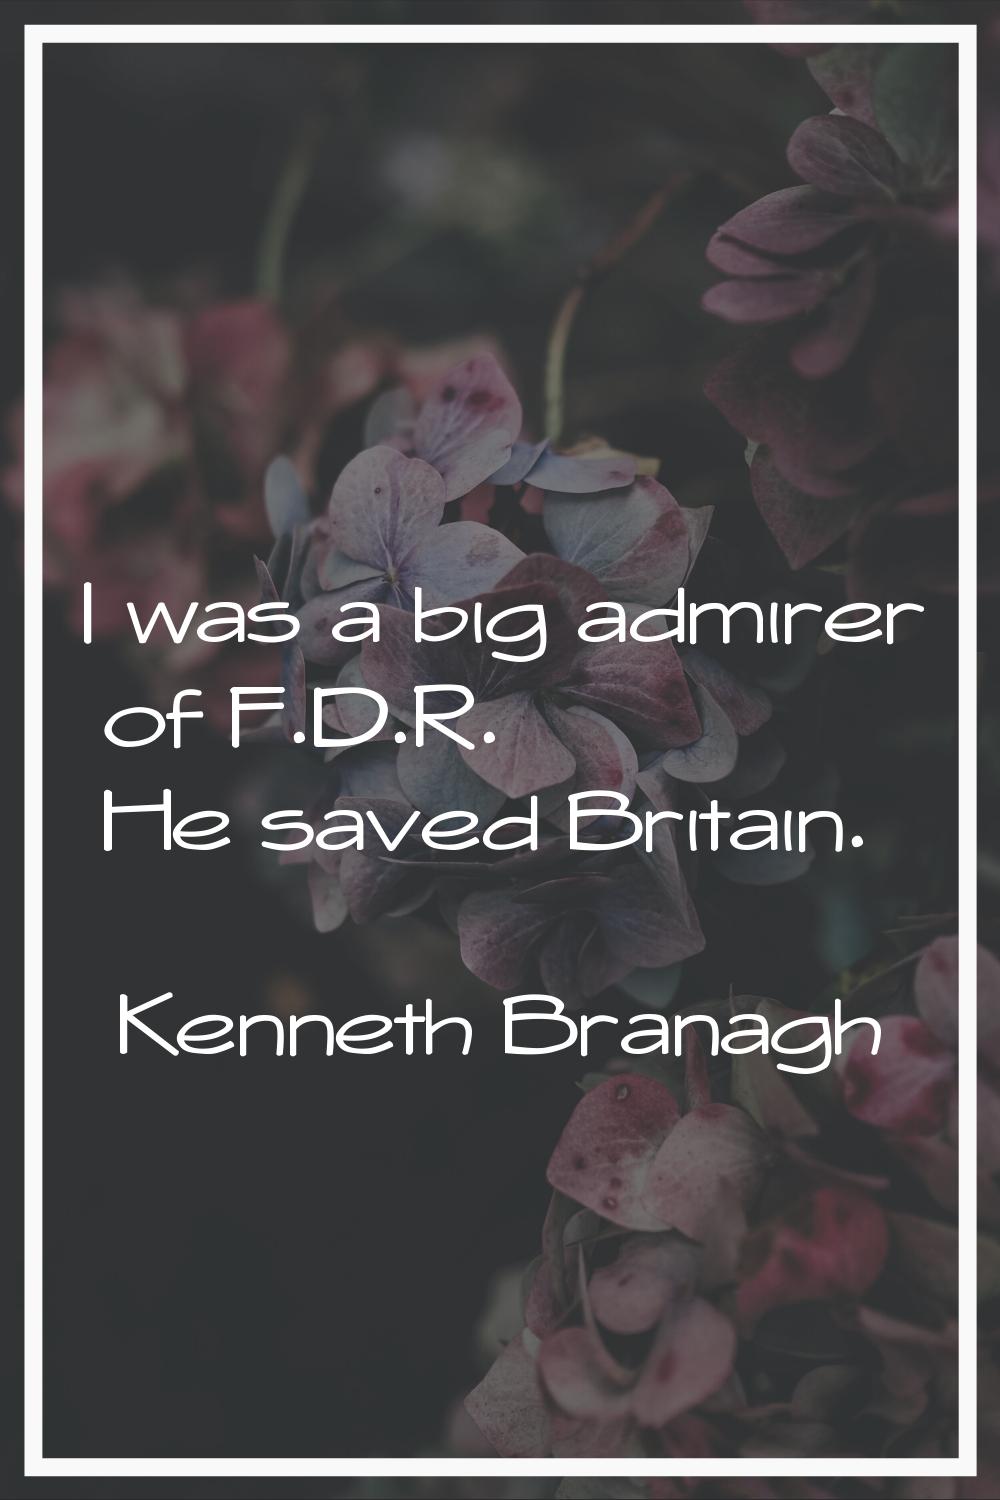 I was a big admirer of F.D.R. He saved Britain.